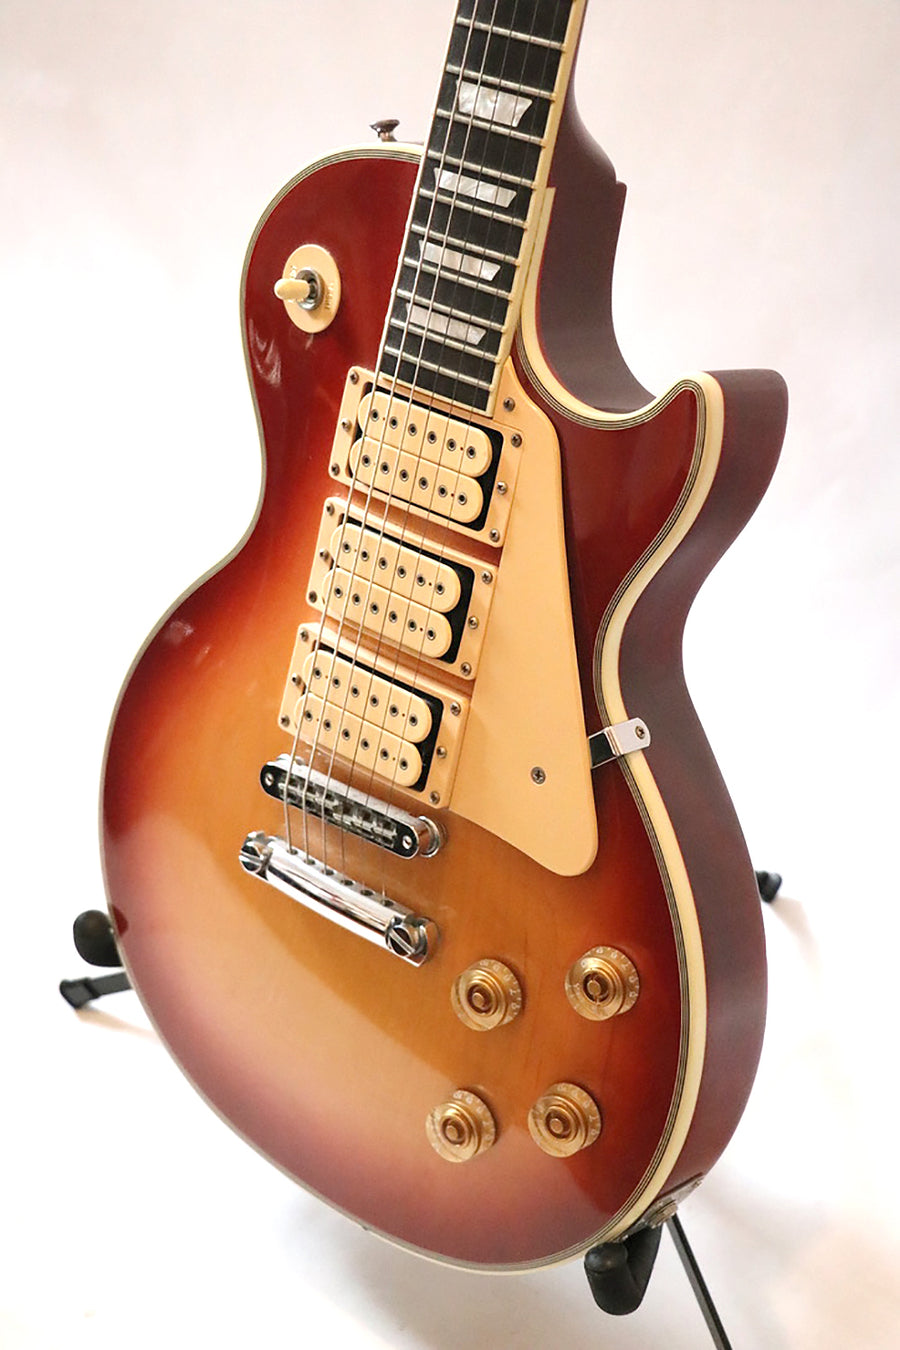 Gibson Les Paul Classic Custom Guitar of the Week Limited Edition - 2007